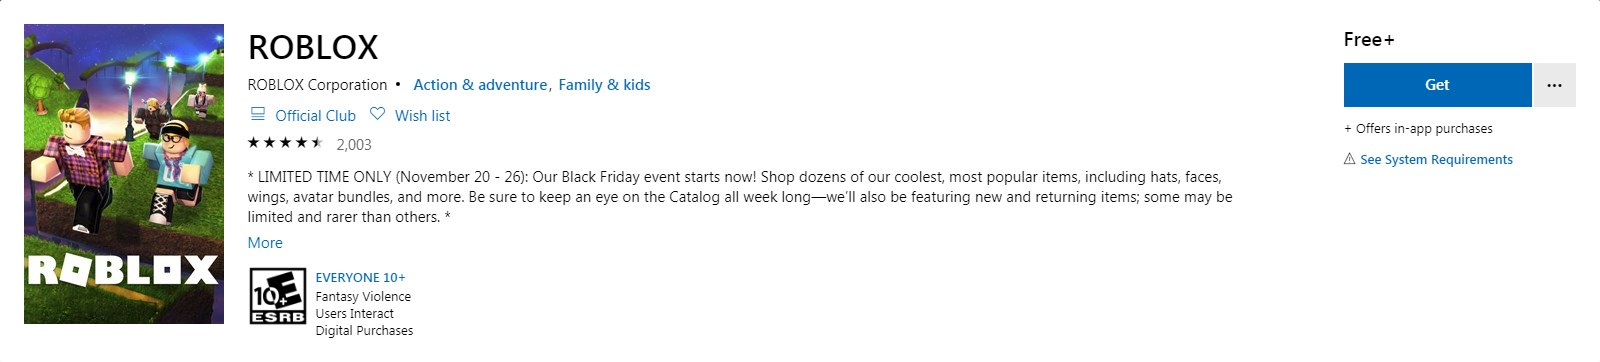 Ivy On Twitter According To The Windows Store Listing Of Roblox The Black Friday Sale Is Supposed To Start Today What Excites Me Here Is The Preview Image On That Same Page - black friday event limited roblox